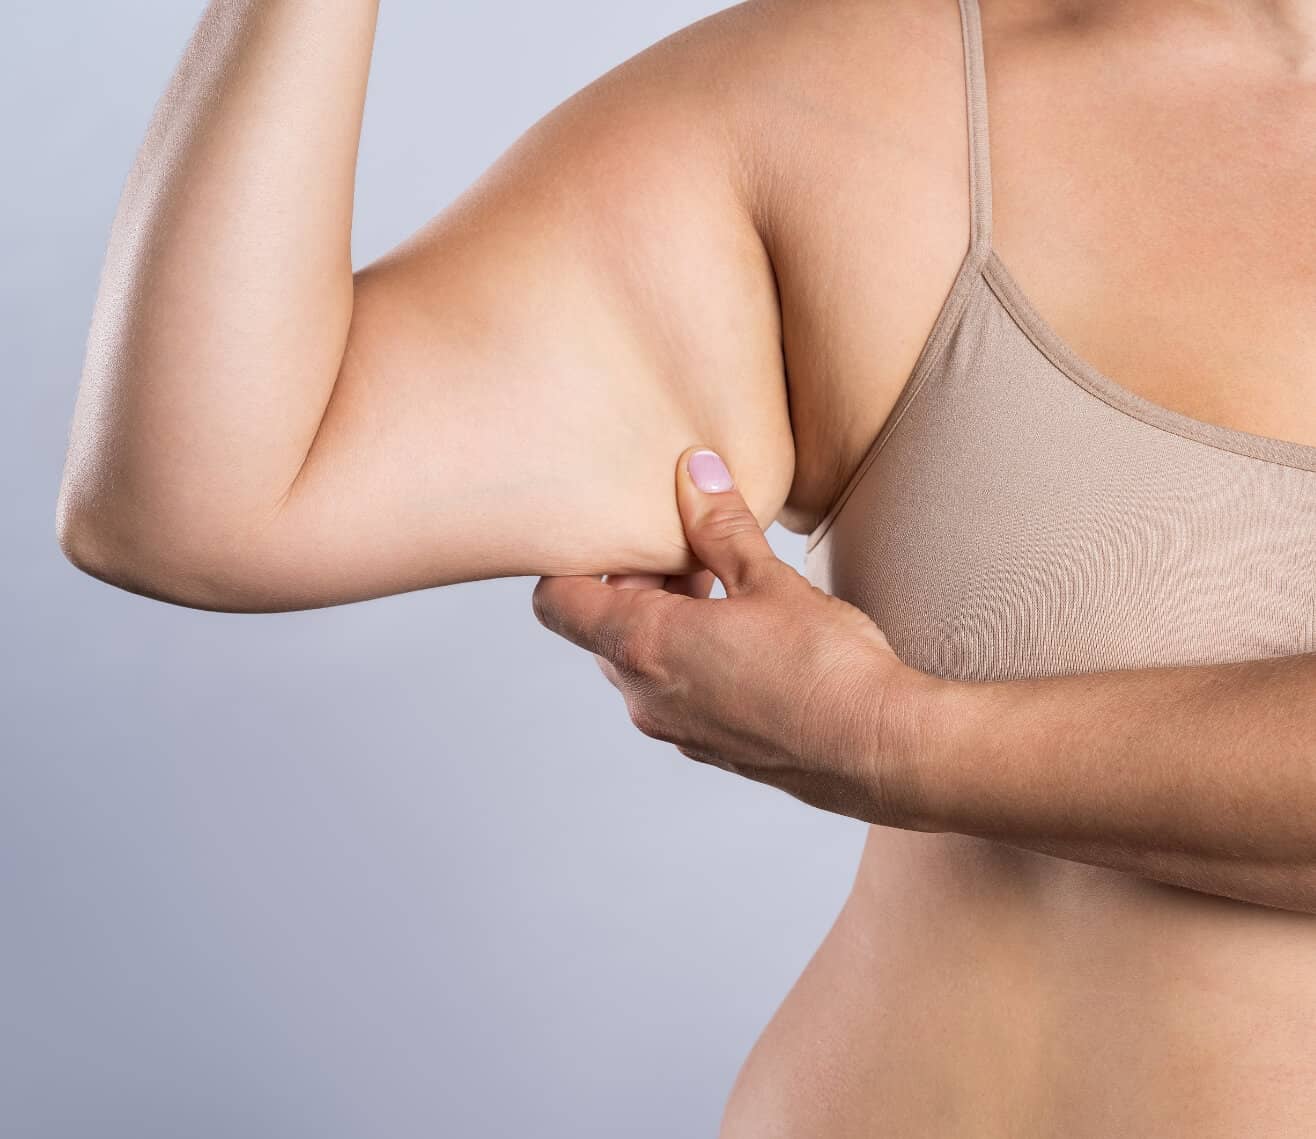 What causes flabby arms